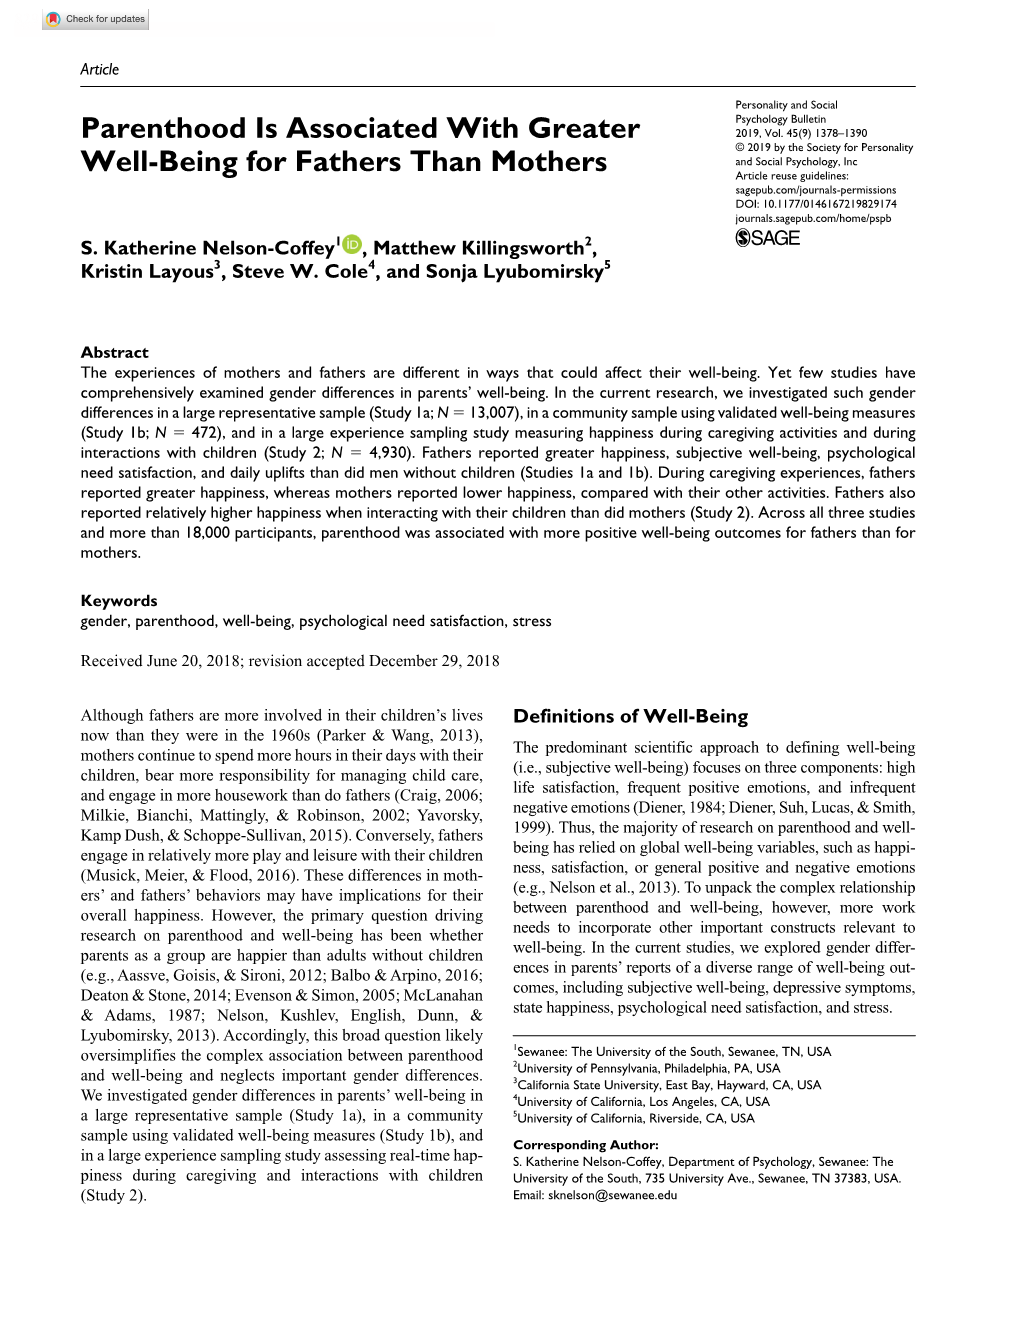 Parenthood Is Associated with Greater Well-Being for Fathers